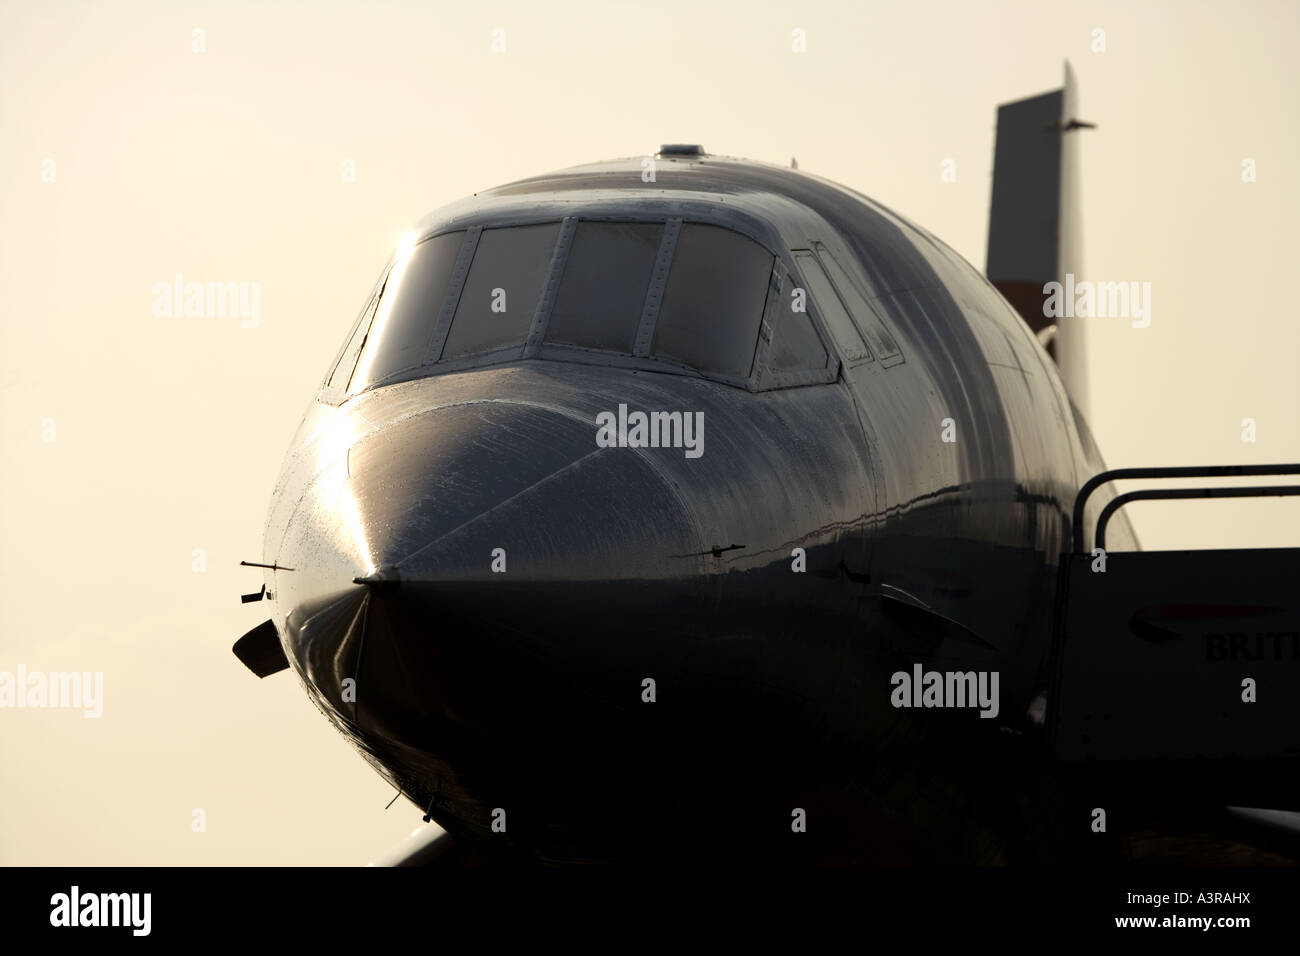 Concorde nose in Silhouette dusk Stock Photo